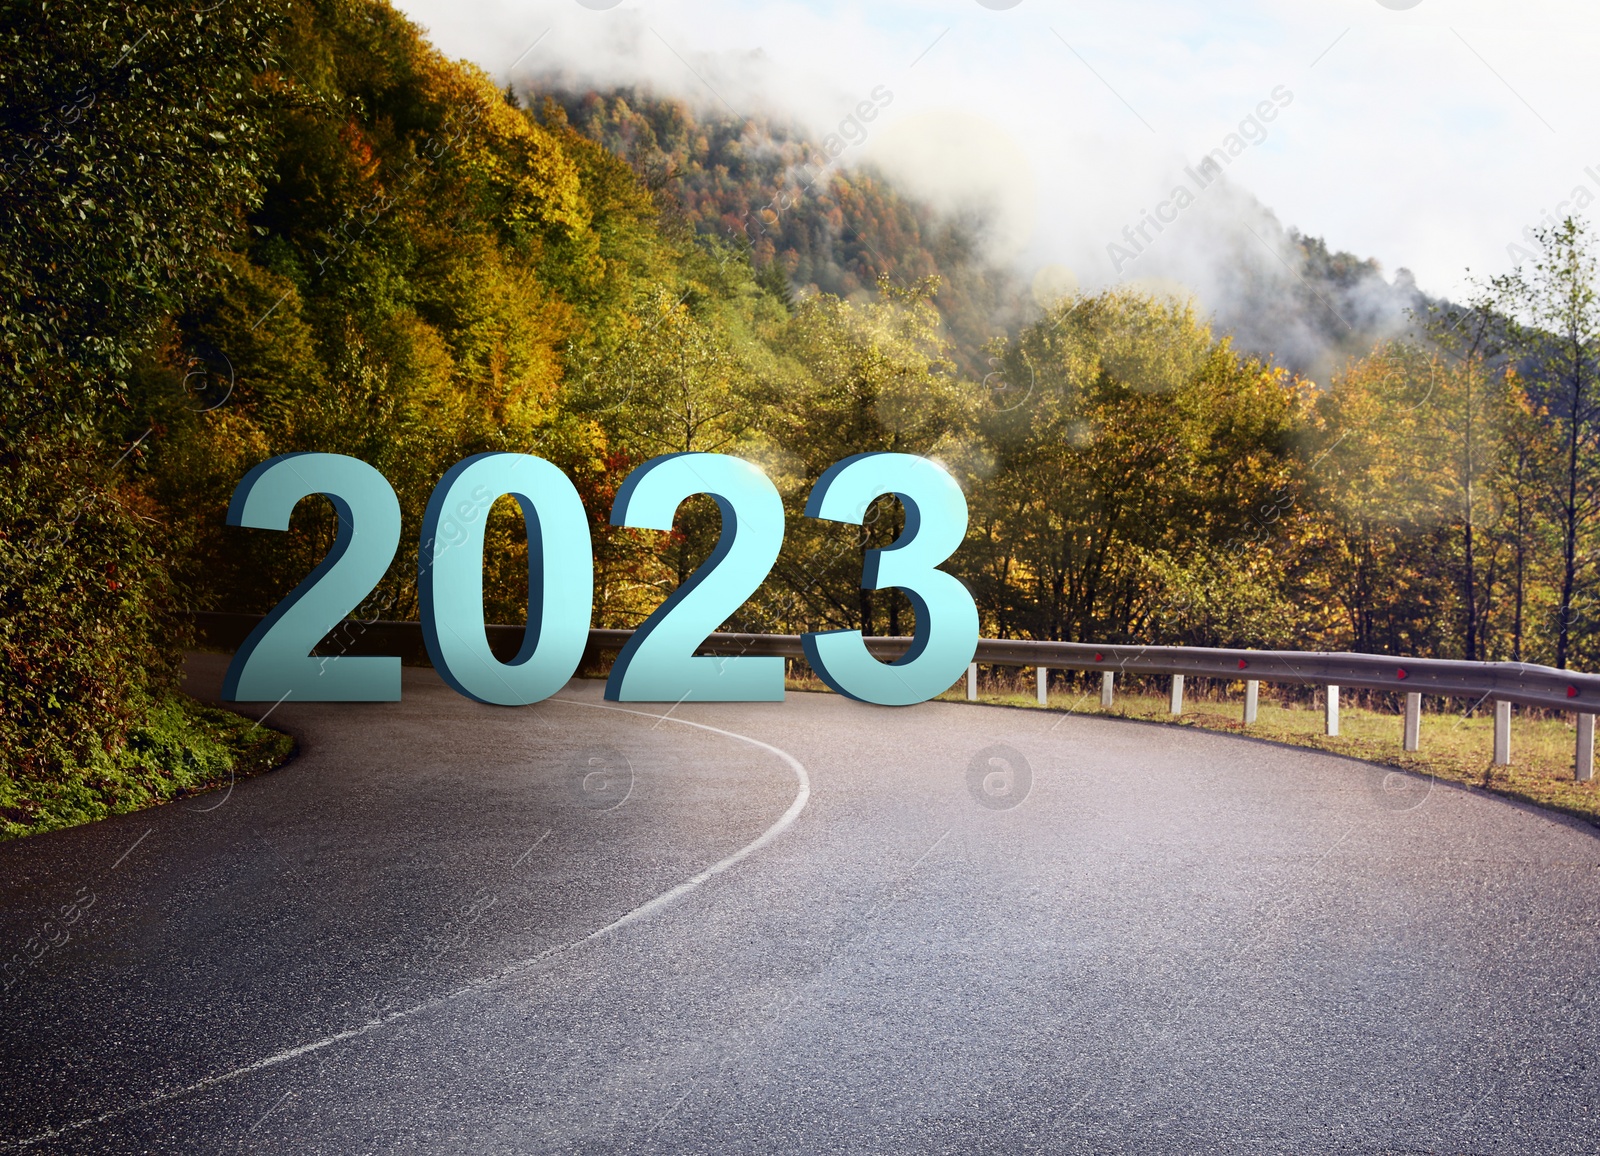 Image of Start of new 2023 year. Asphalt road leading to numbers